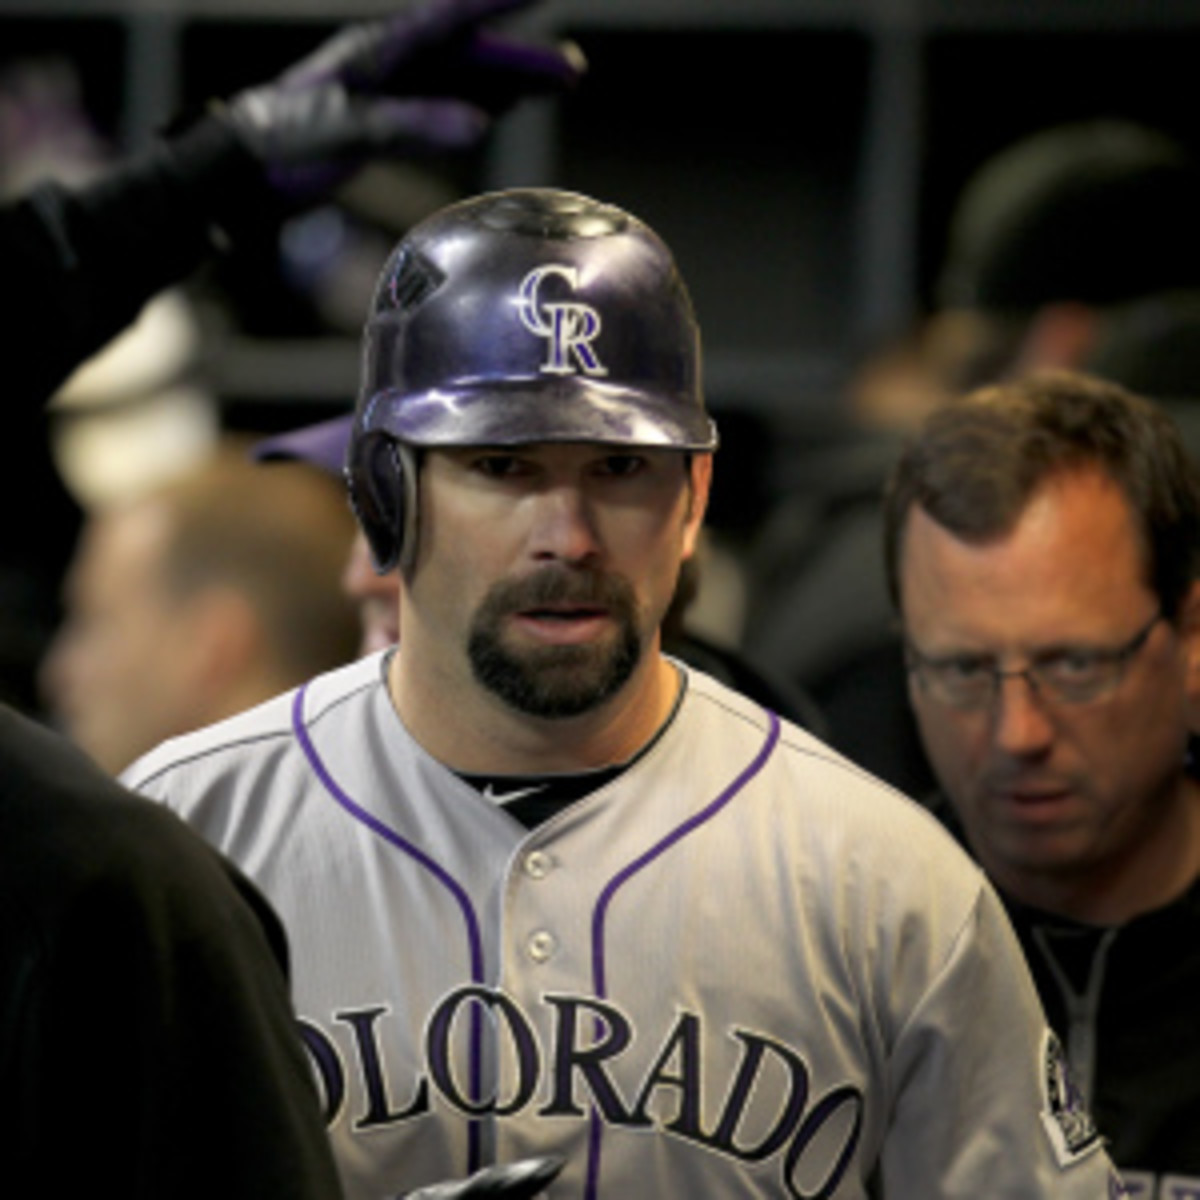 Rockies first baseman Todd Helton was arrested for a DUI on Wednesday morning. (Mike McGinnis/Getty Images)